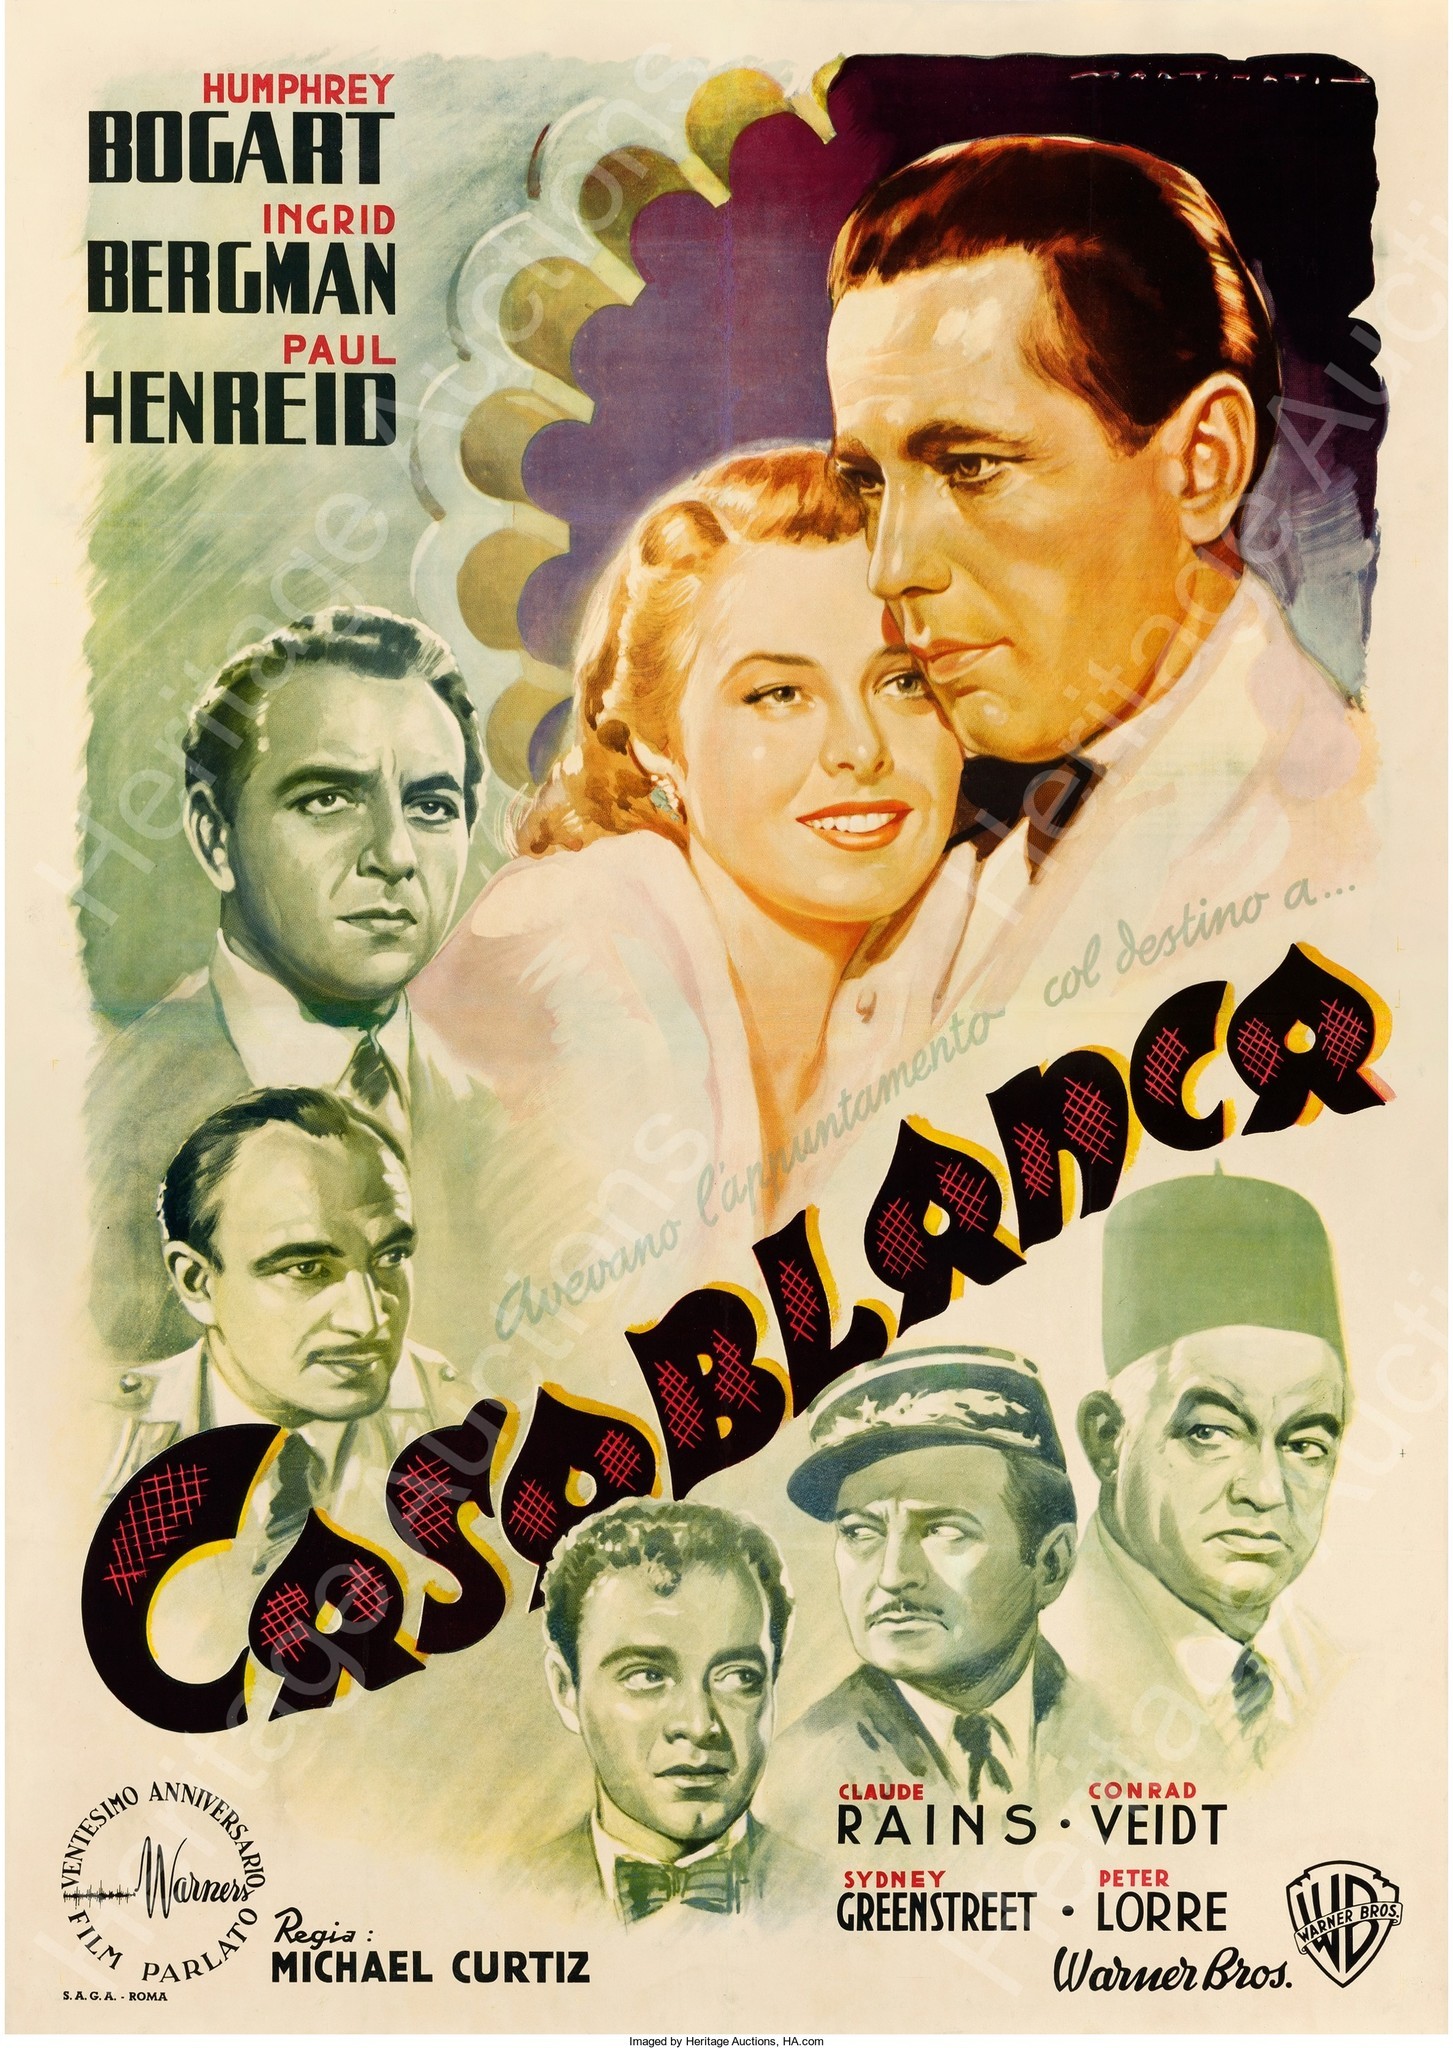 An Italian-issue "Casablanca" poster sold at auction for $487,000 (Heritage Auctions)